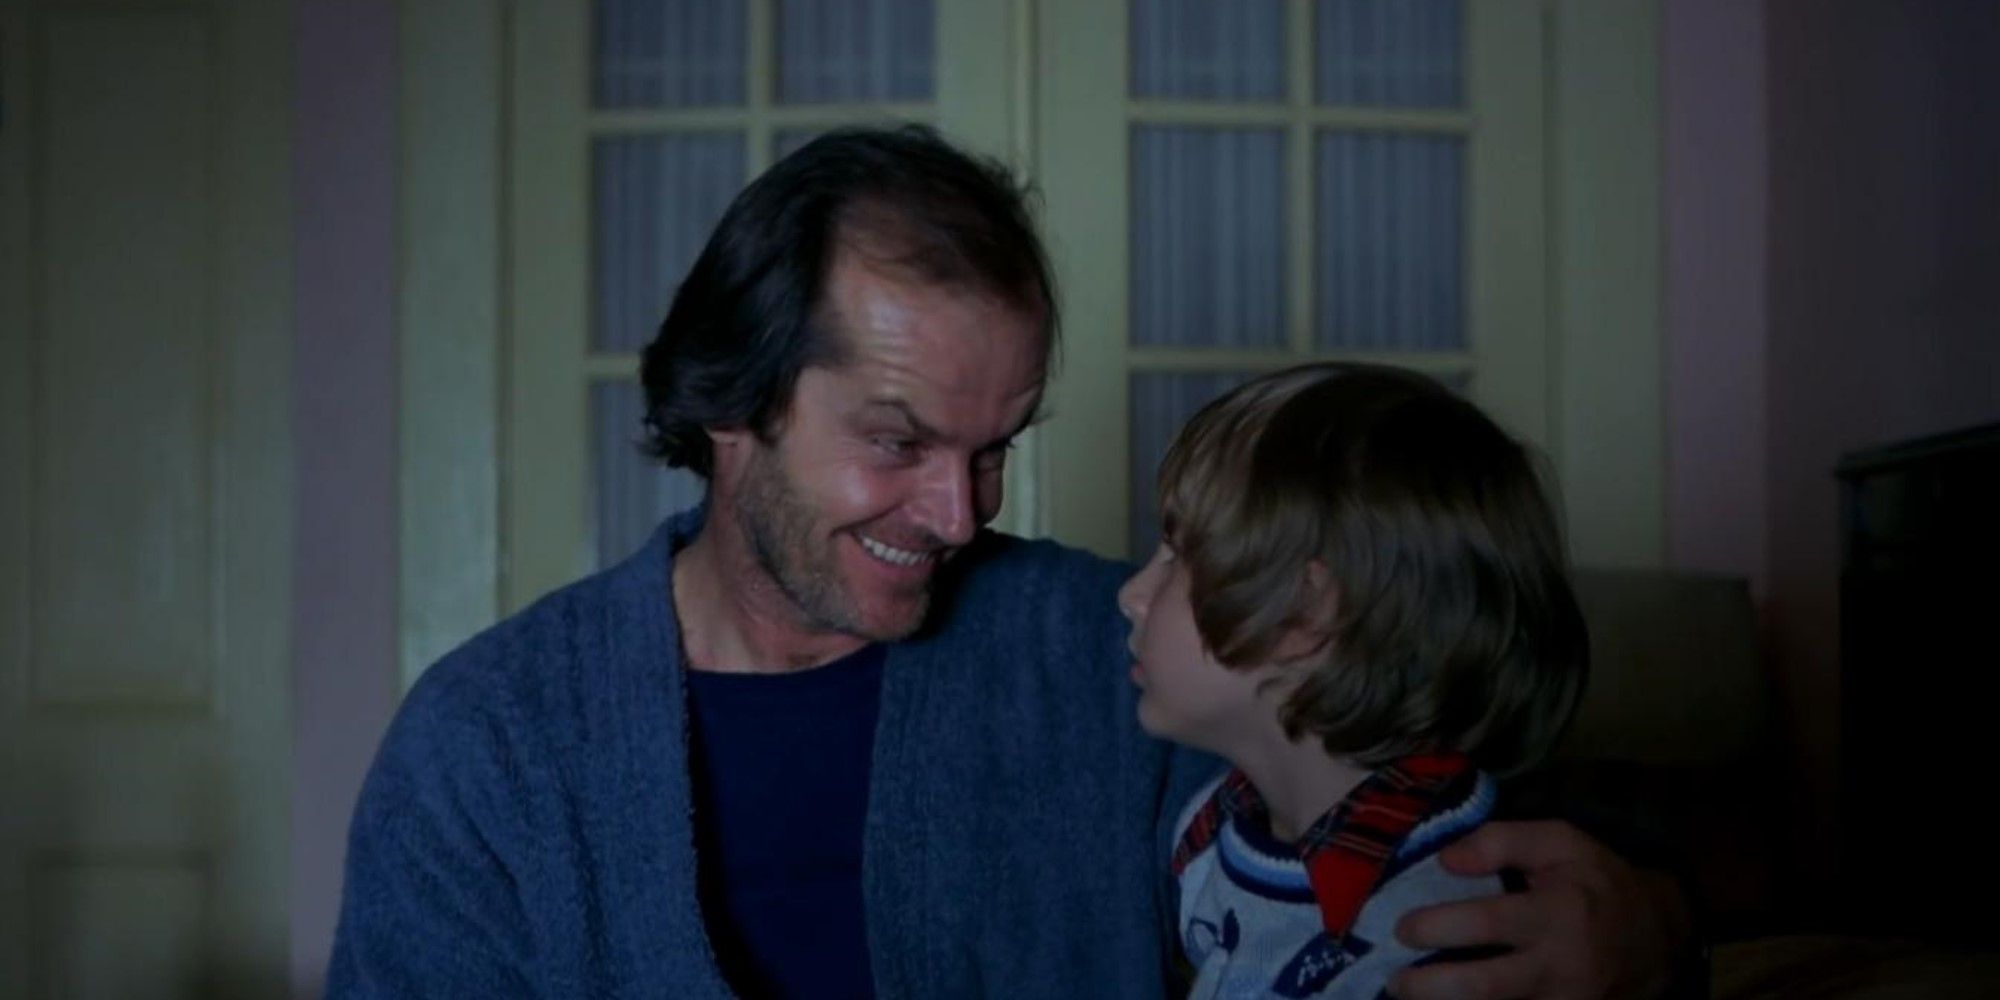 The Shining 10 Crucial Scenes From The Book That Didn’t Make It Into The Movie